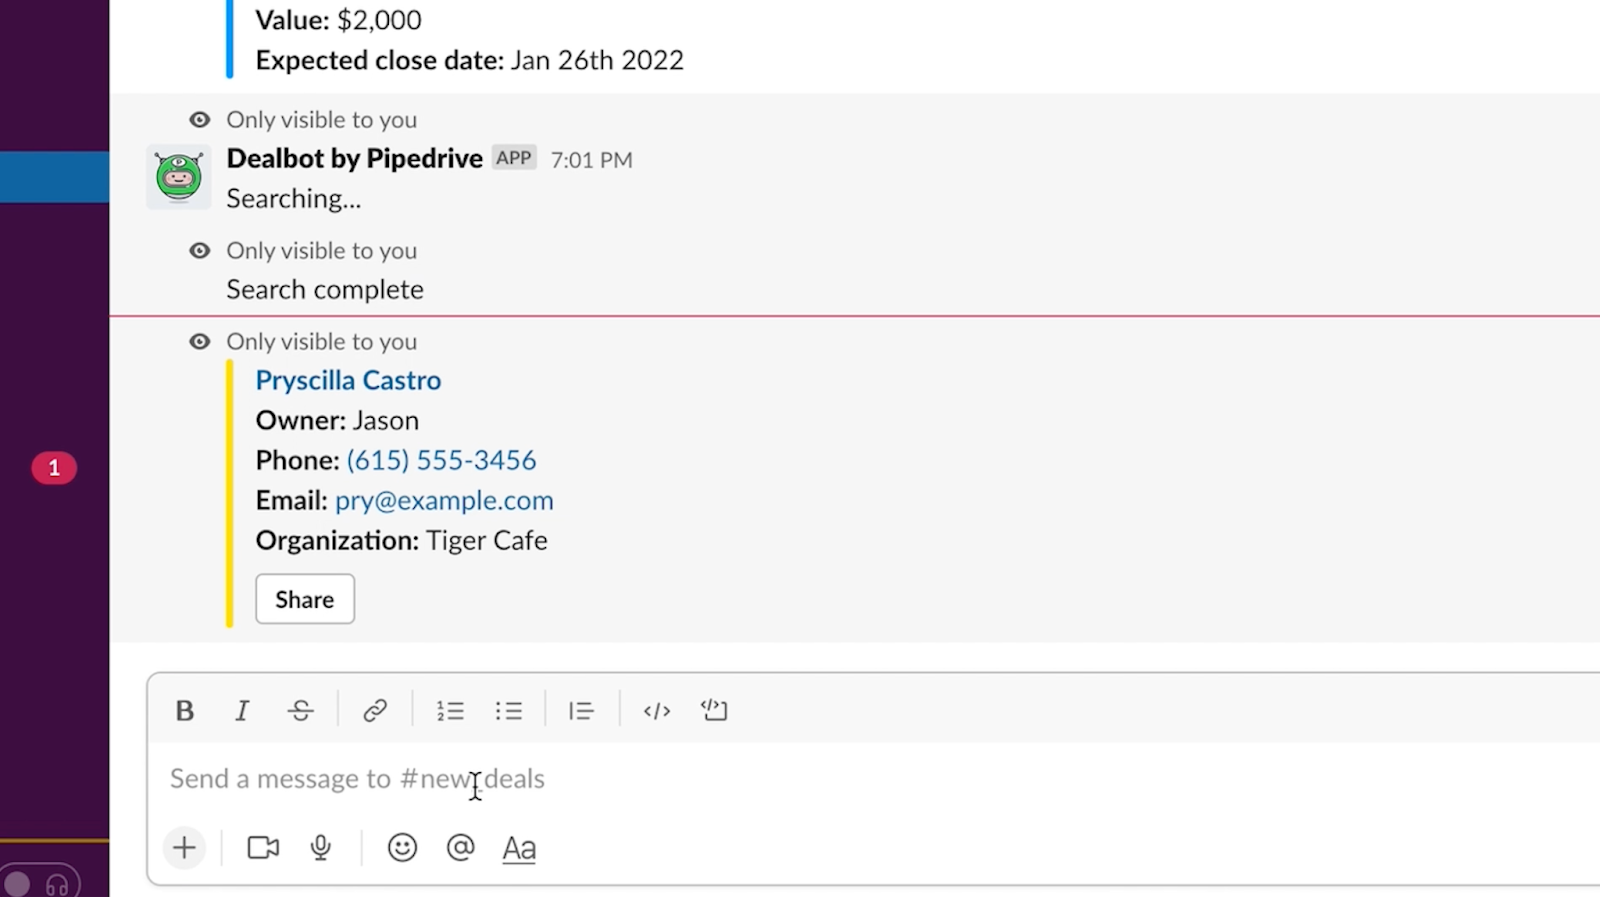 An example of a sales update message in Slack by Dealbot